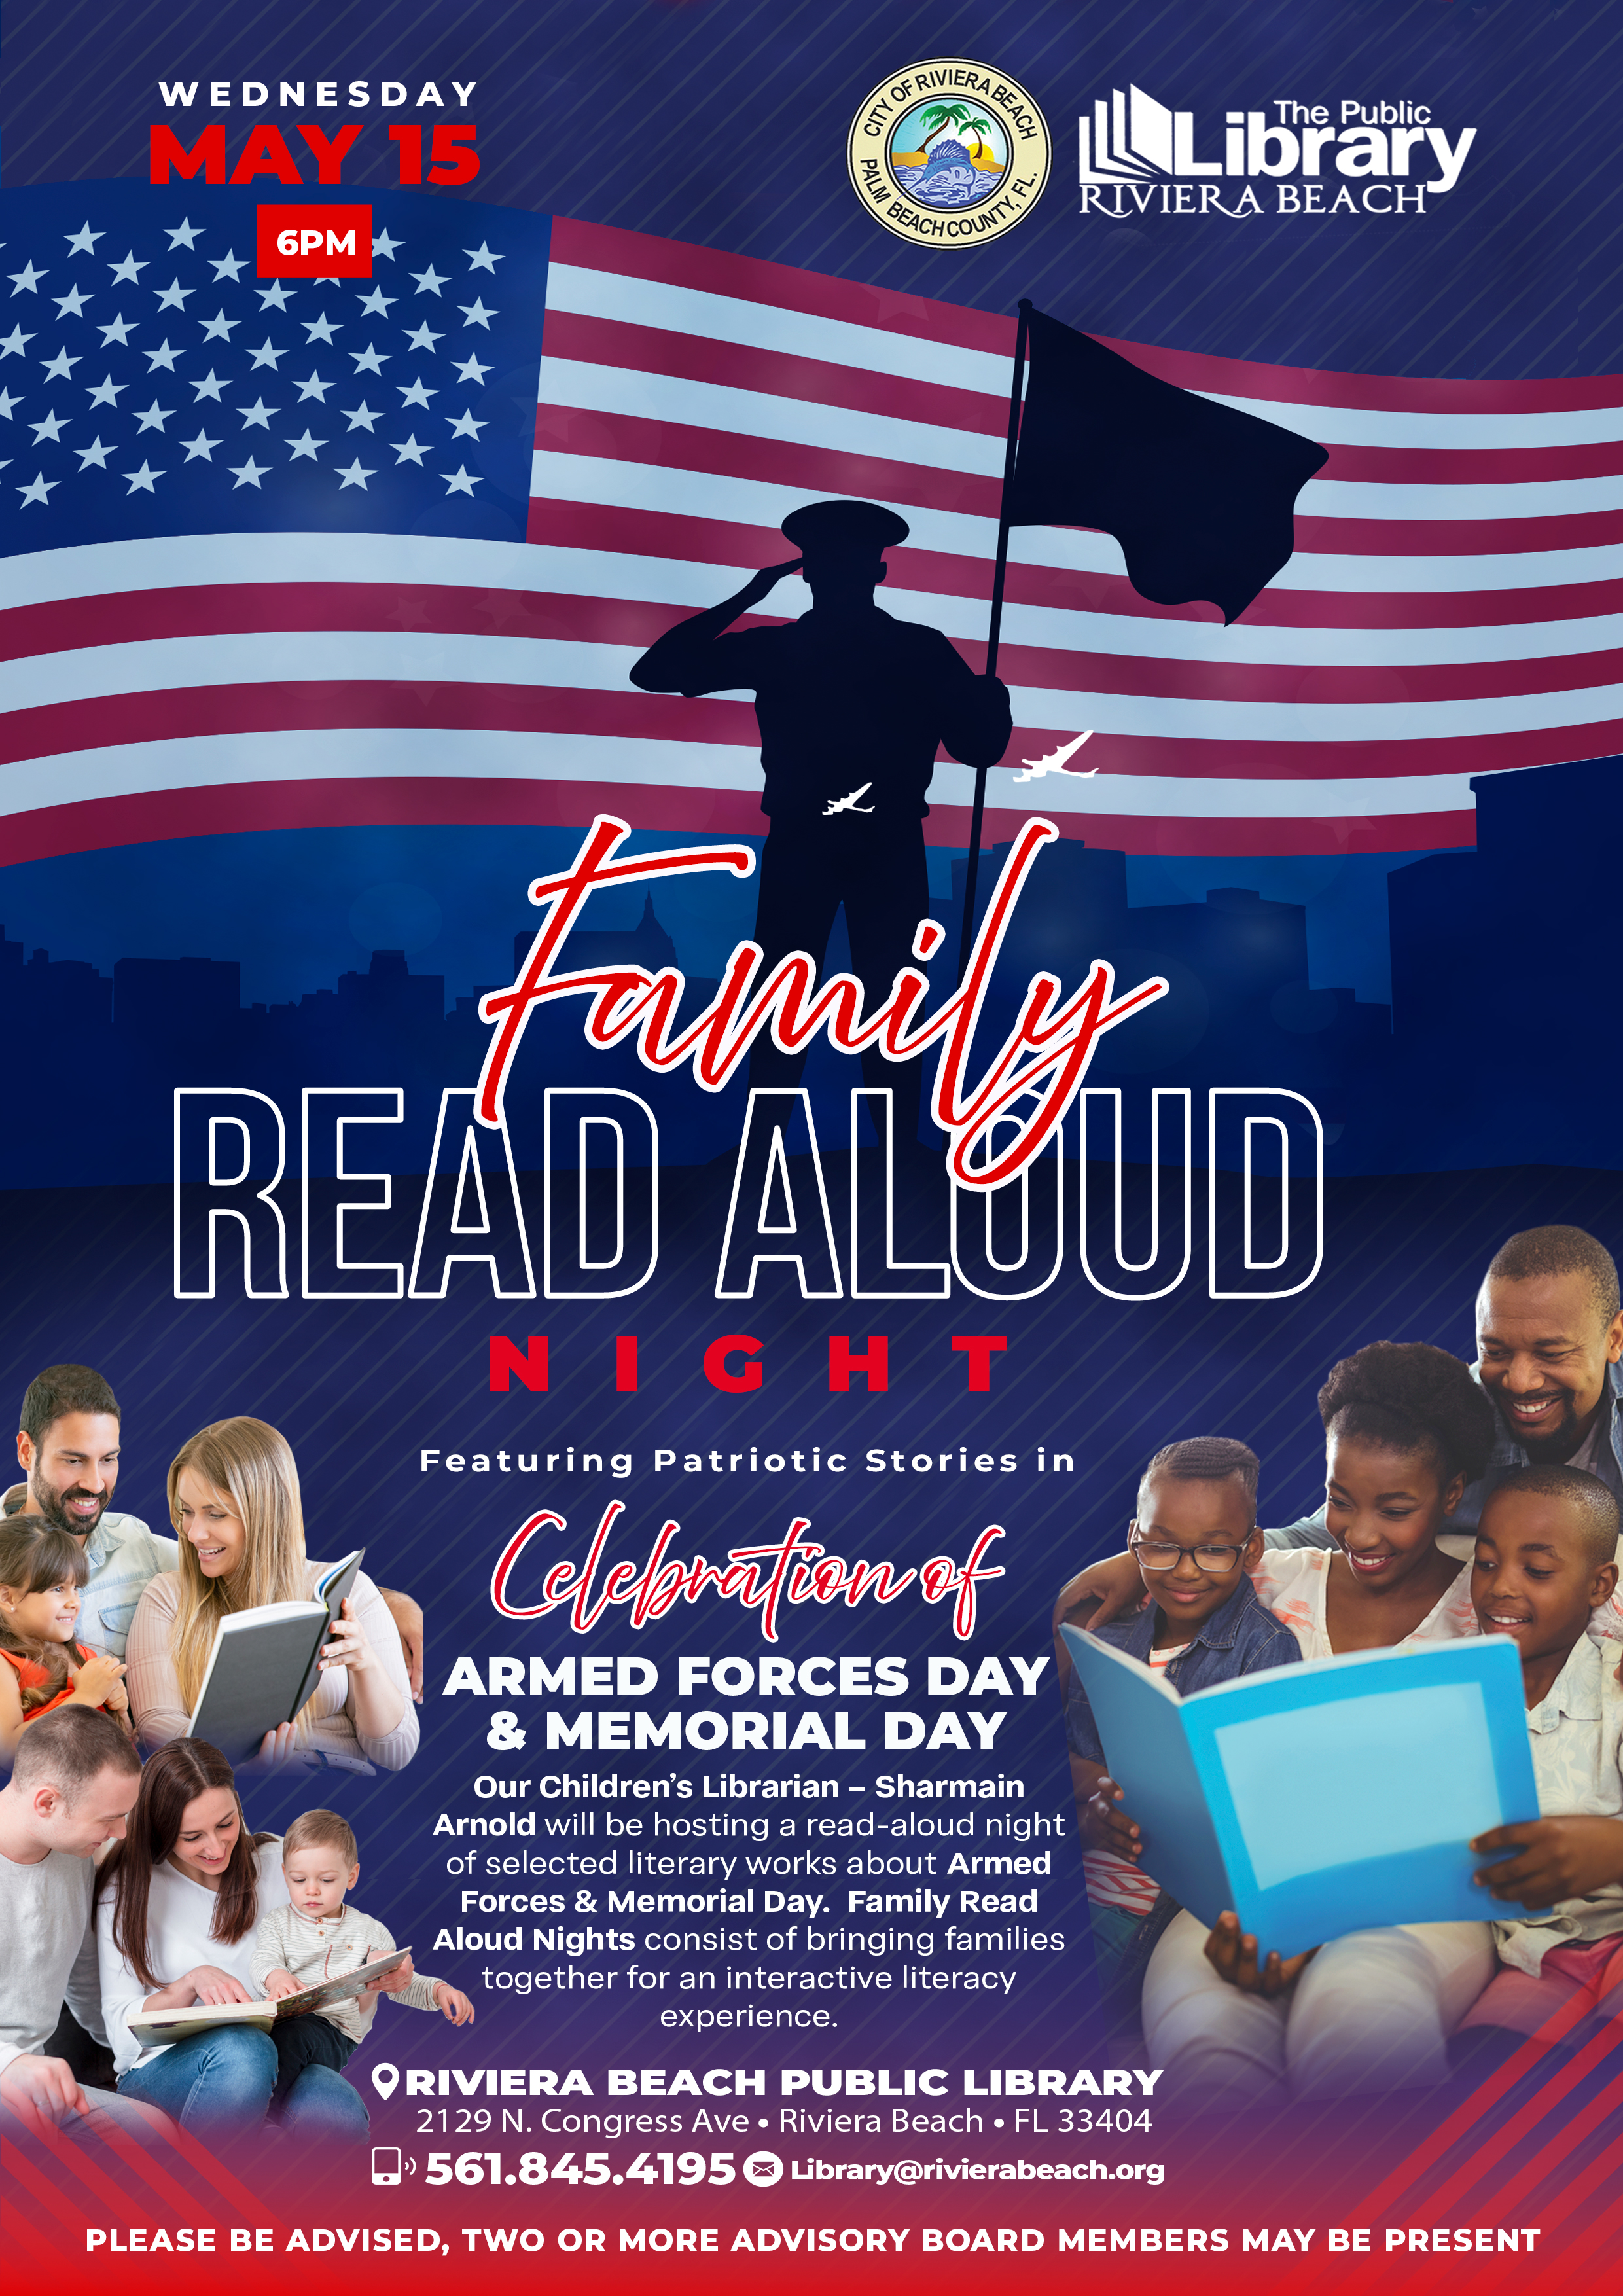 Featuring Patriotic Stories in ARMED FORCES DAY & MEMORIAL DAY Our Children's Librarian - Sharmain Arnold will be hosting a read-aloud night of selected literary works about Armed Forces & Memorial Day. Family Read Aloud Nights consist of bringing families together for an interactive literacy experience. •RIVIERA BEACH PUBLIC LIBRARY 2129 N. Congress Ave • Riviera Beach • FL 33404 • 561.845.4195 Library@rivierabeach.org PLEASE BE ADVISED, TWO OR MORE ADVISORY BOARD MEMBERS MAY BE PRESENT